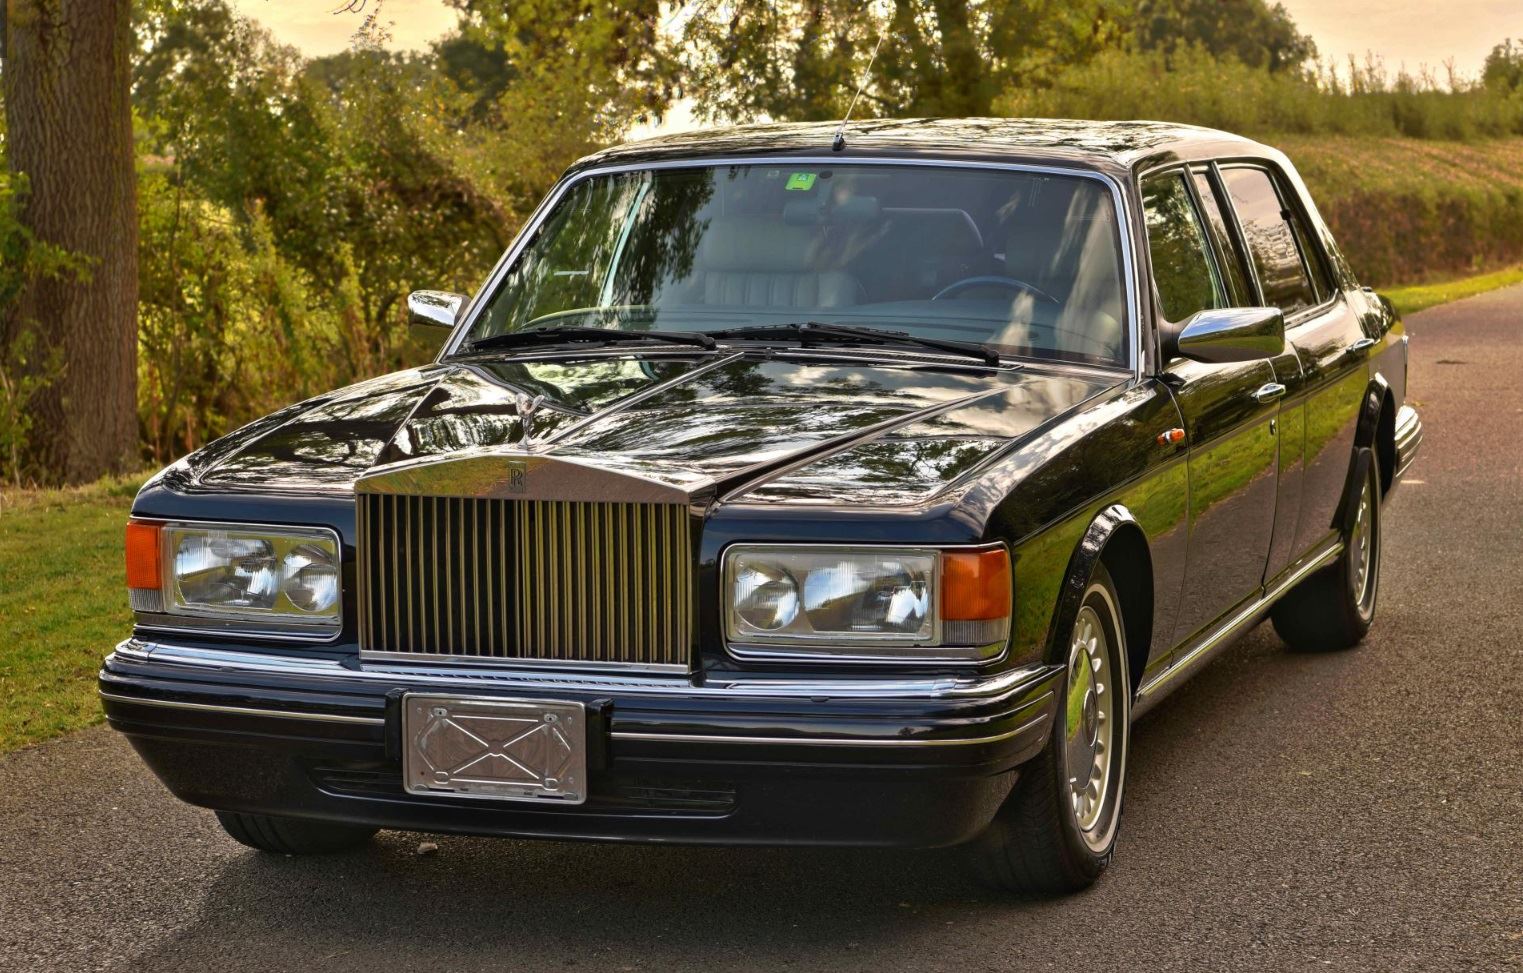 Rolls royce silver spur touring limousine lhd with division kqihy7cn5yqukrbe0r4i6